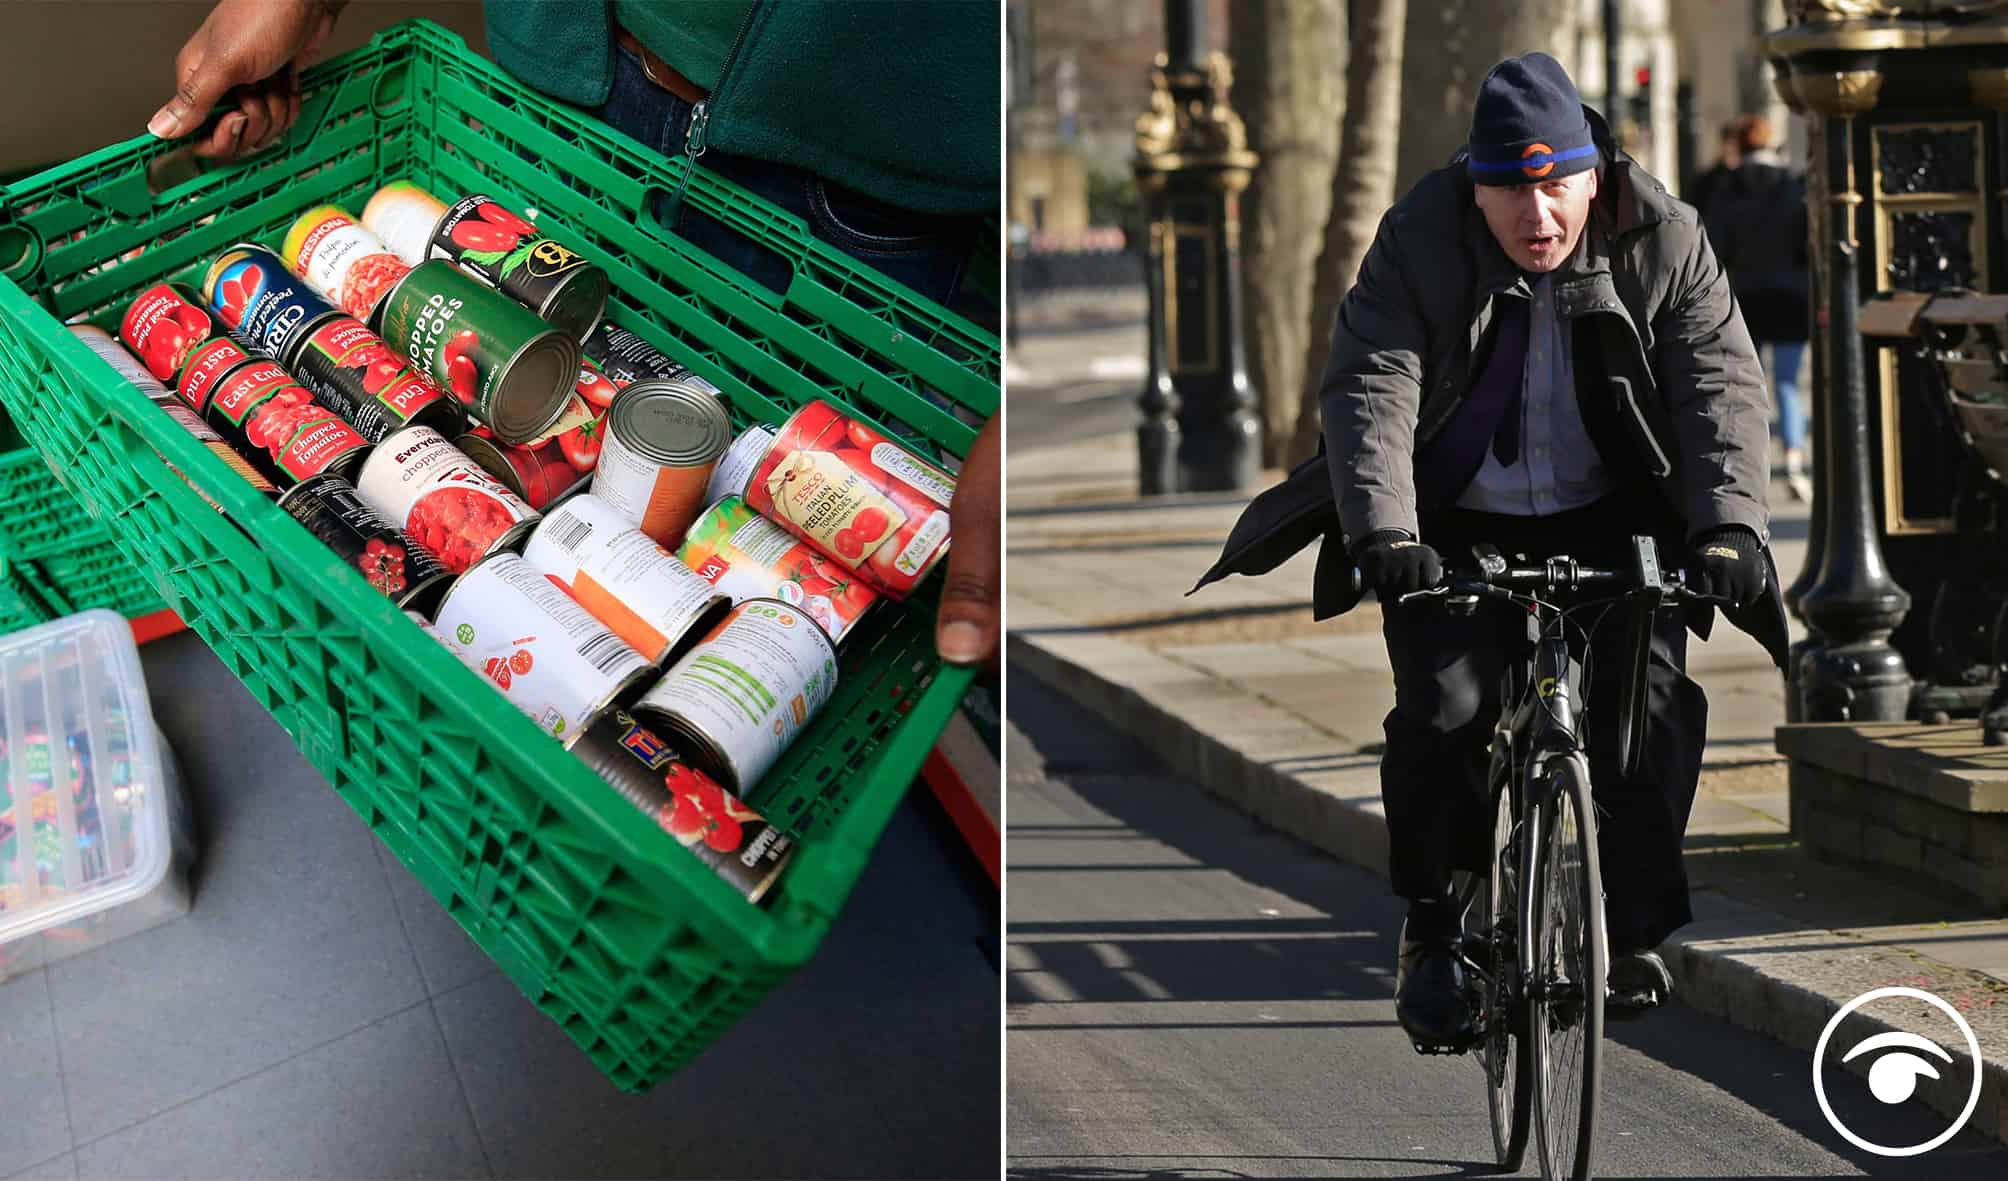 Universal Credit: Tories risk return to ‘nasty party’ warns Government’s former homelessness adviser